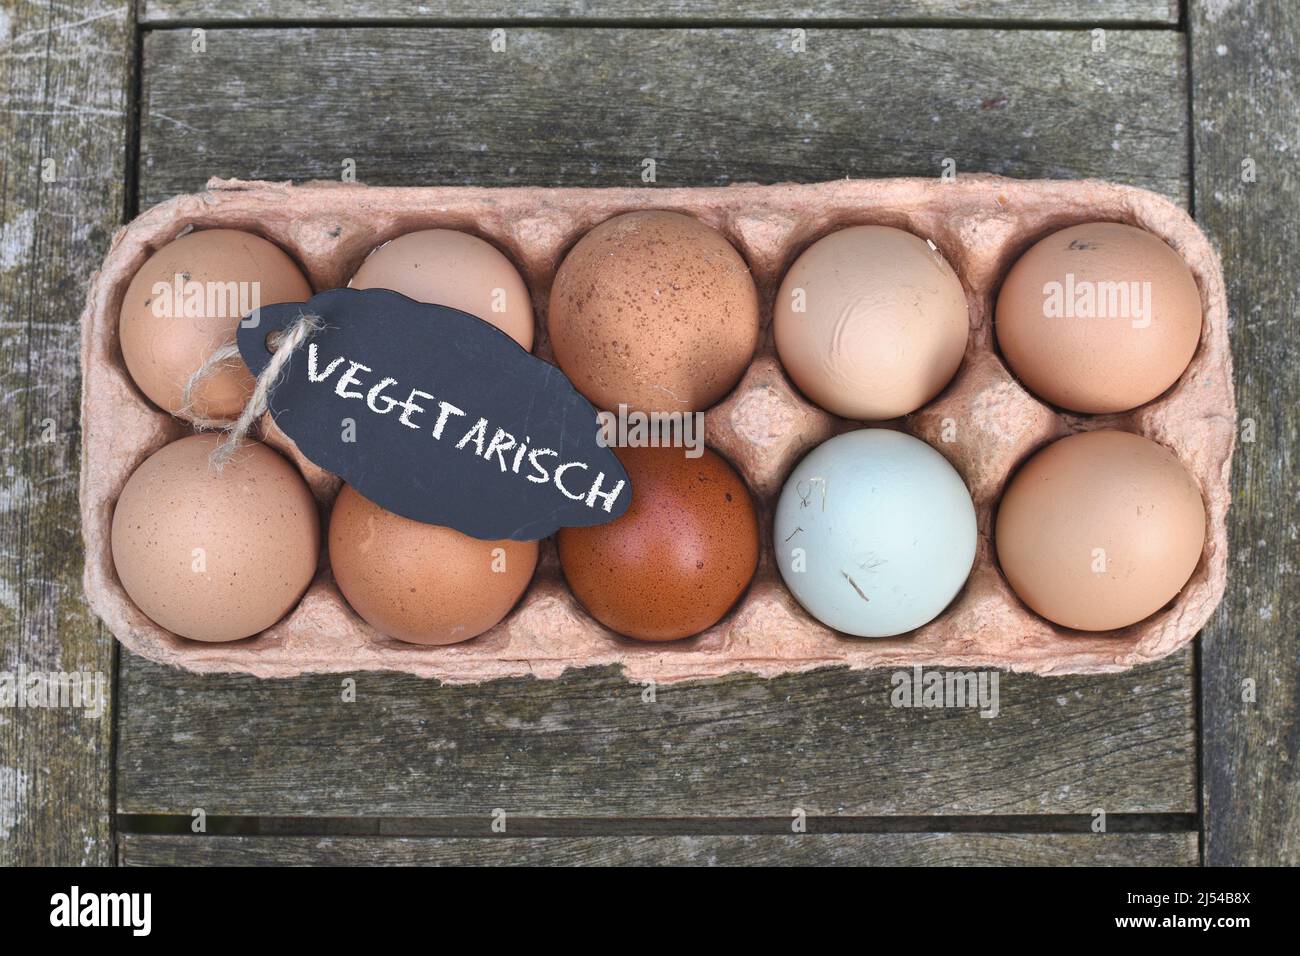 chalkboard with the inscription 'Vegetarisch' on chicken eggs in the egg carton, Germany Stock Photo